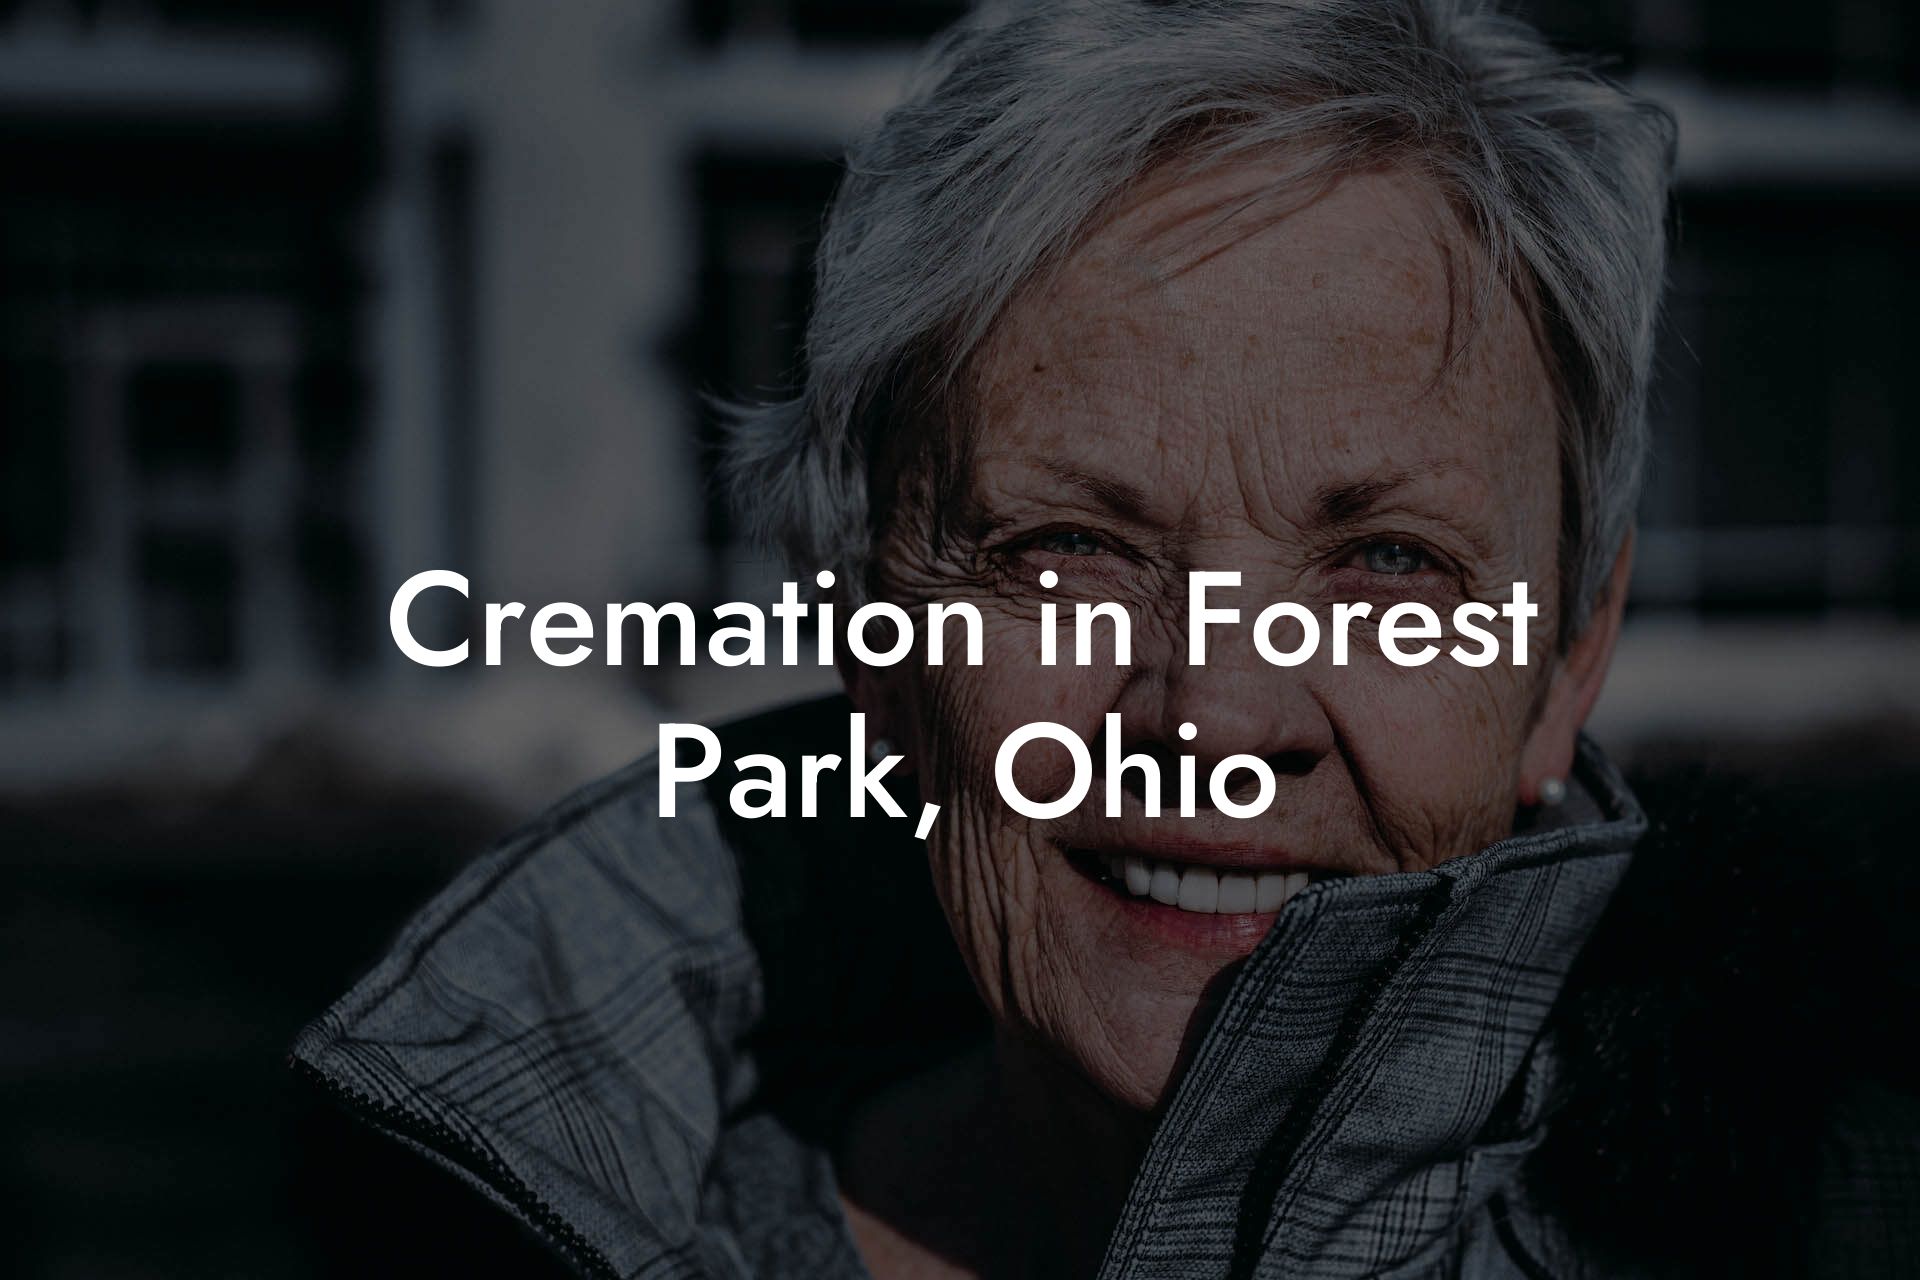 Cremation in Forest Park, Ohio